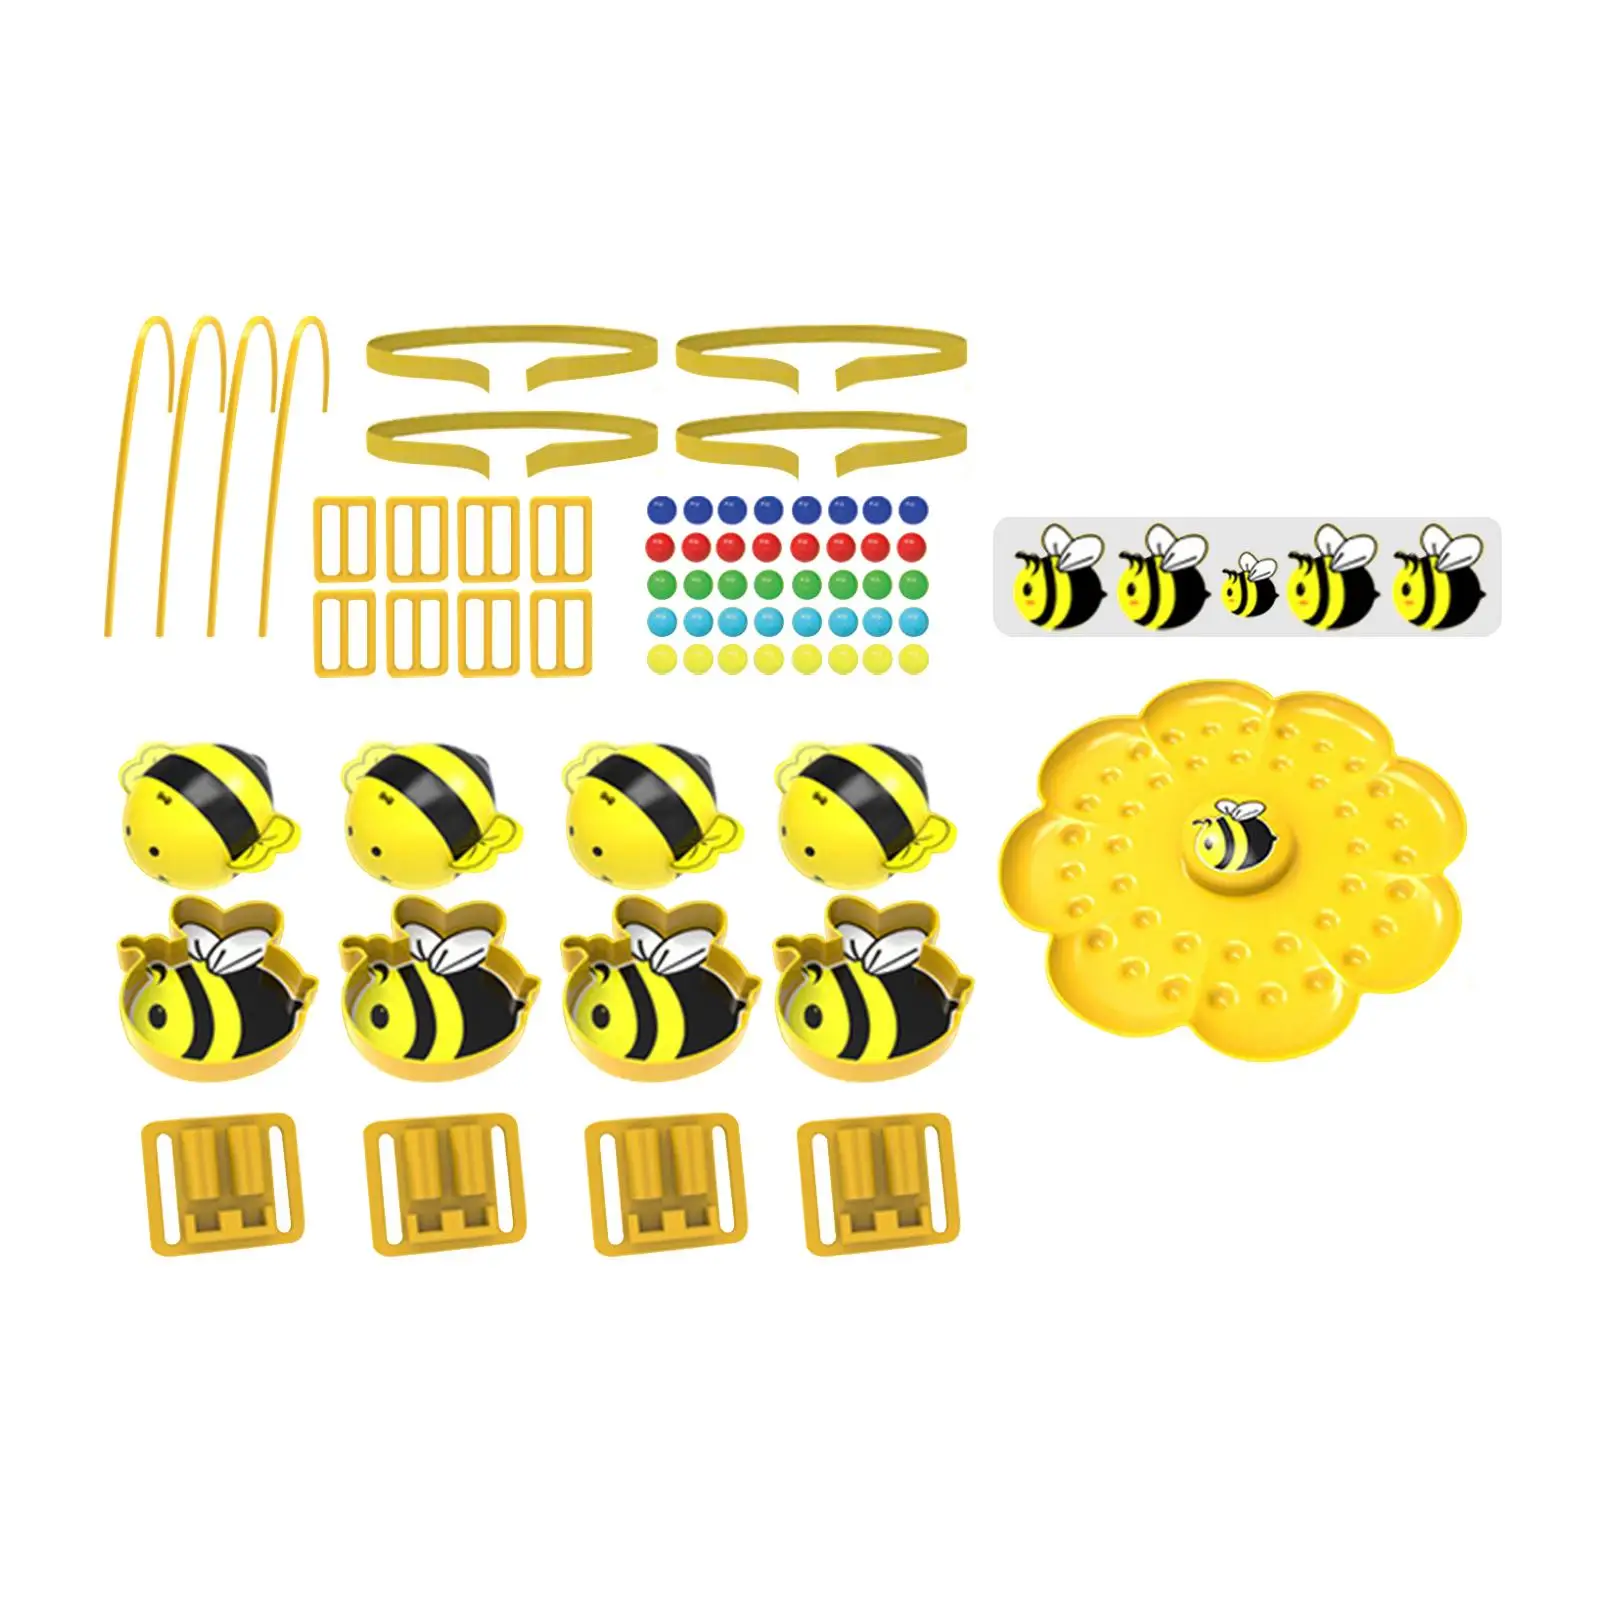 Forehead Fishing Game Toy Counting Toy Development Toy Magnetics Bead Little Bee Montessori Toy for Girls Boys Kids Children